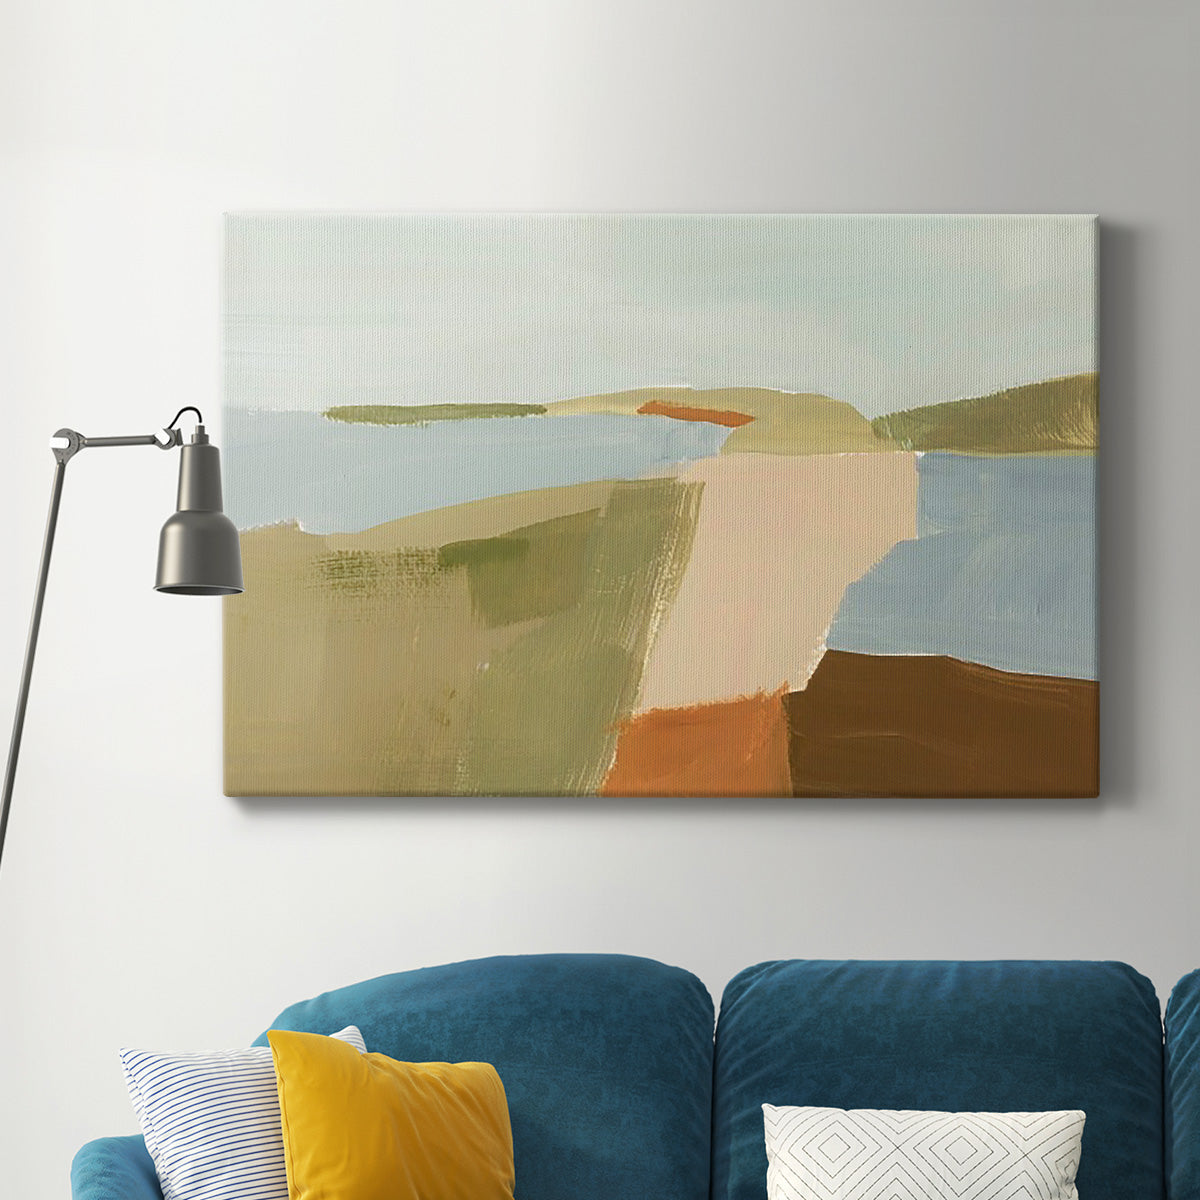 Stacked Landscape II Premium Gallery Wrapped Canvas - Ready to Hang